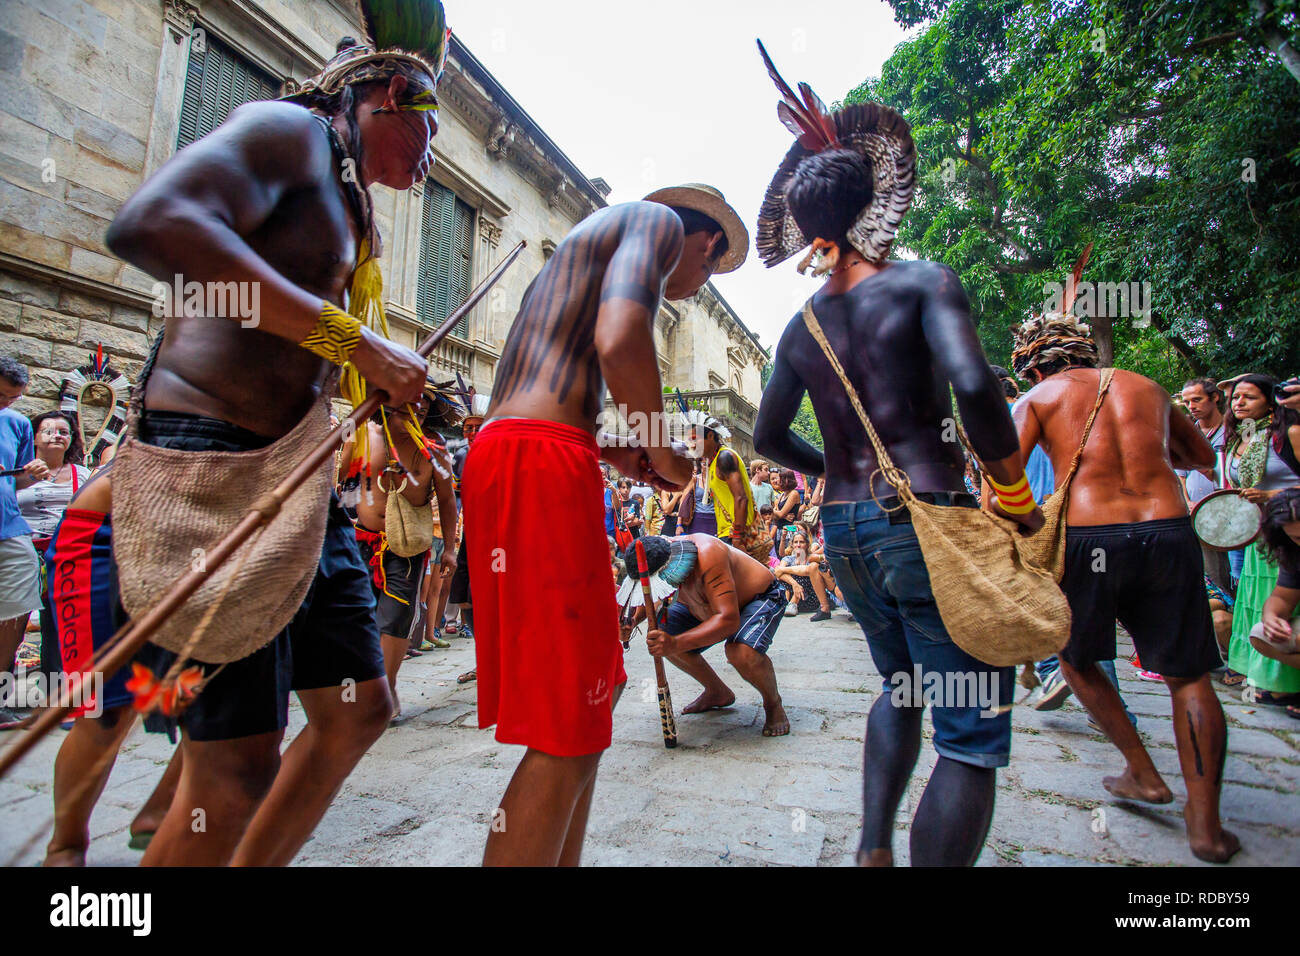 Indians dancing on Indian day at Parque Lage, Rio de Janeiro, Brazil Stock Photo